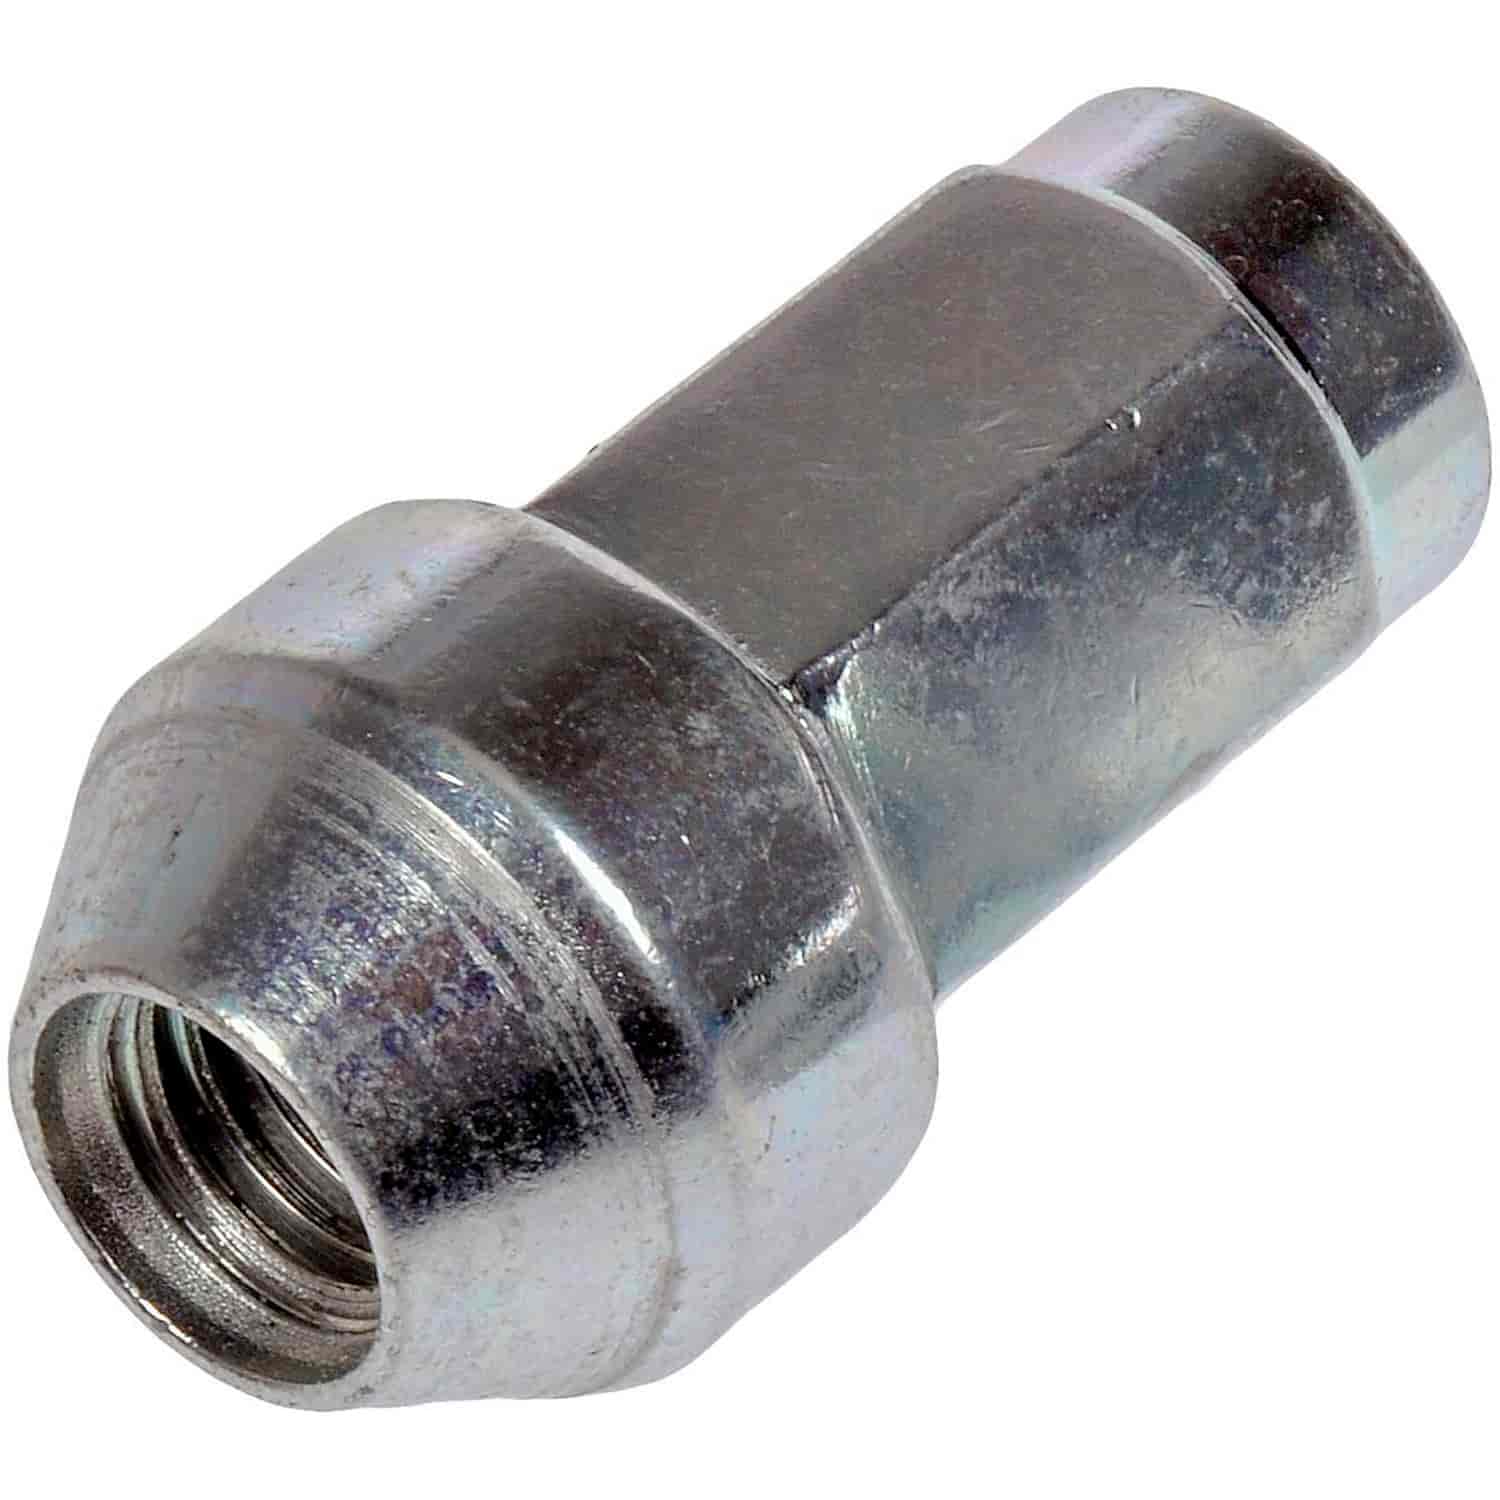 Wheel Nut M14-2.0 Dometop Capped - 21mm Hex 54mm Length